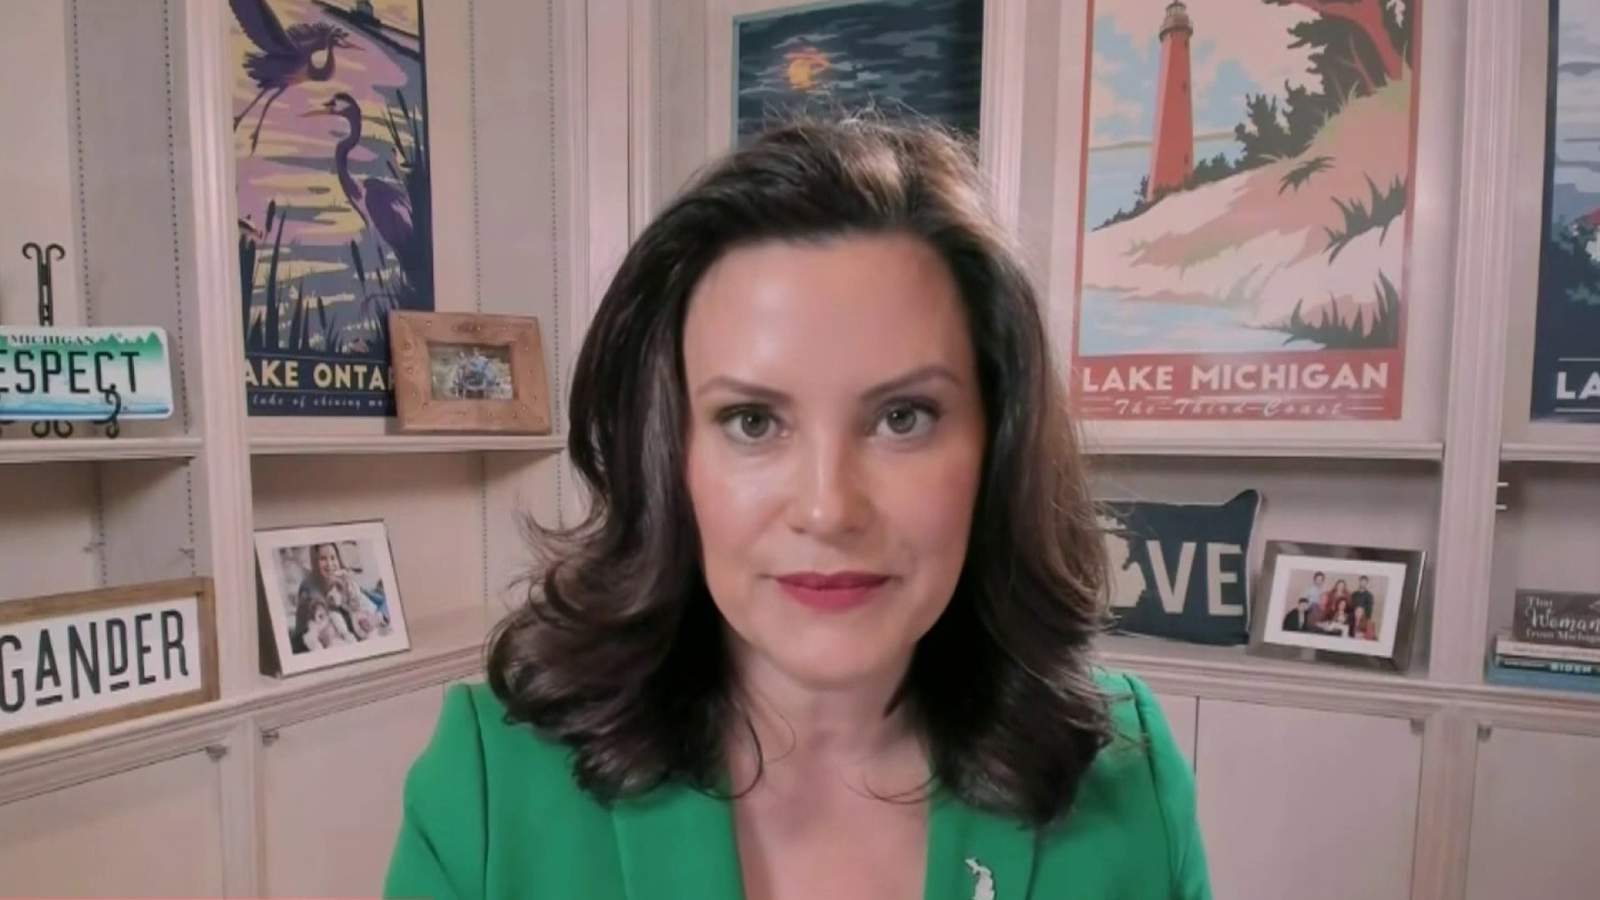 ‘Words have consequences’: Gov. Whitmer says Trump encouraged domestic terrorism in Washington, Michigan